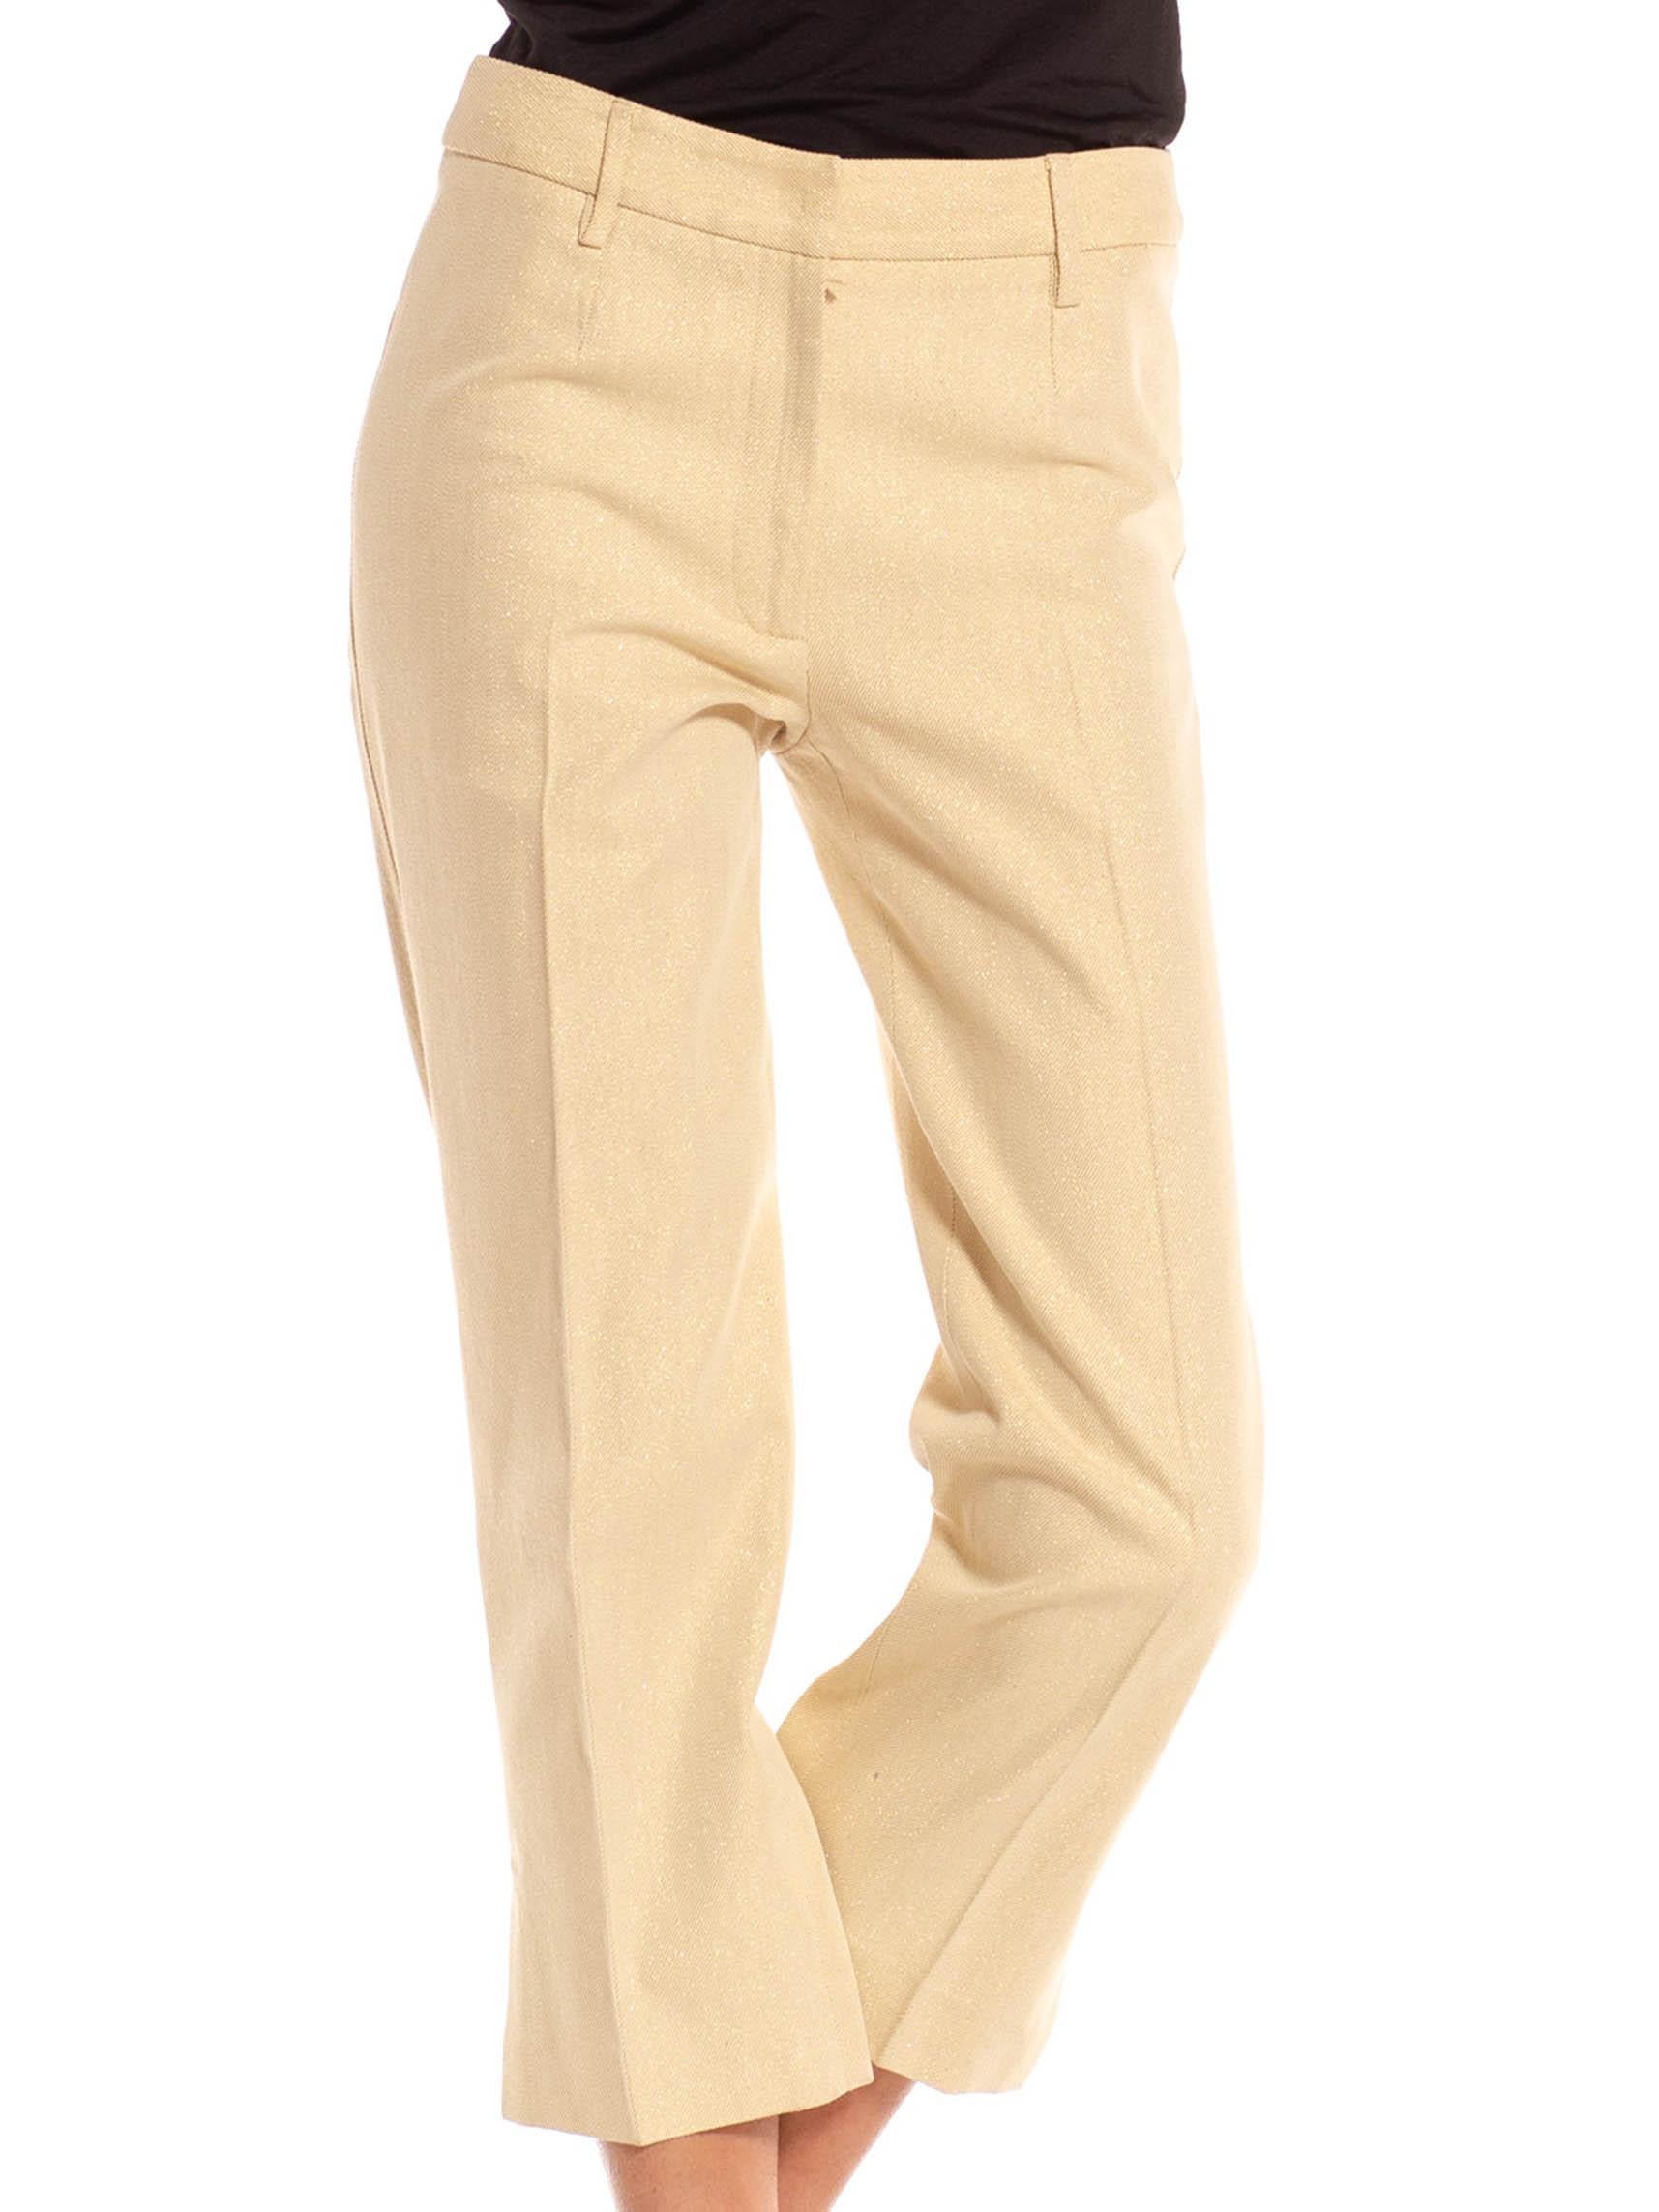 2000S Dolce & Gabbana Golden Yellow Cotton Blend Canvas Metallic Woven Pants In Excellent Condition For Sale In New York, NY